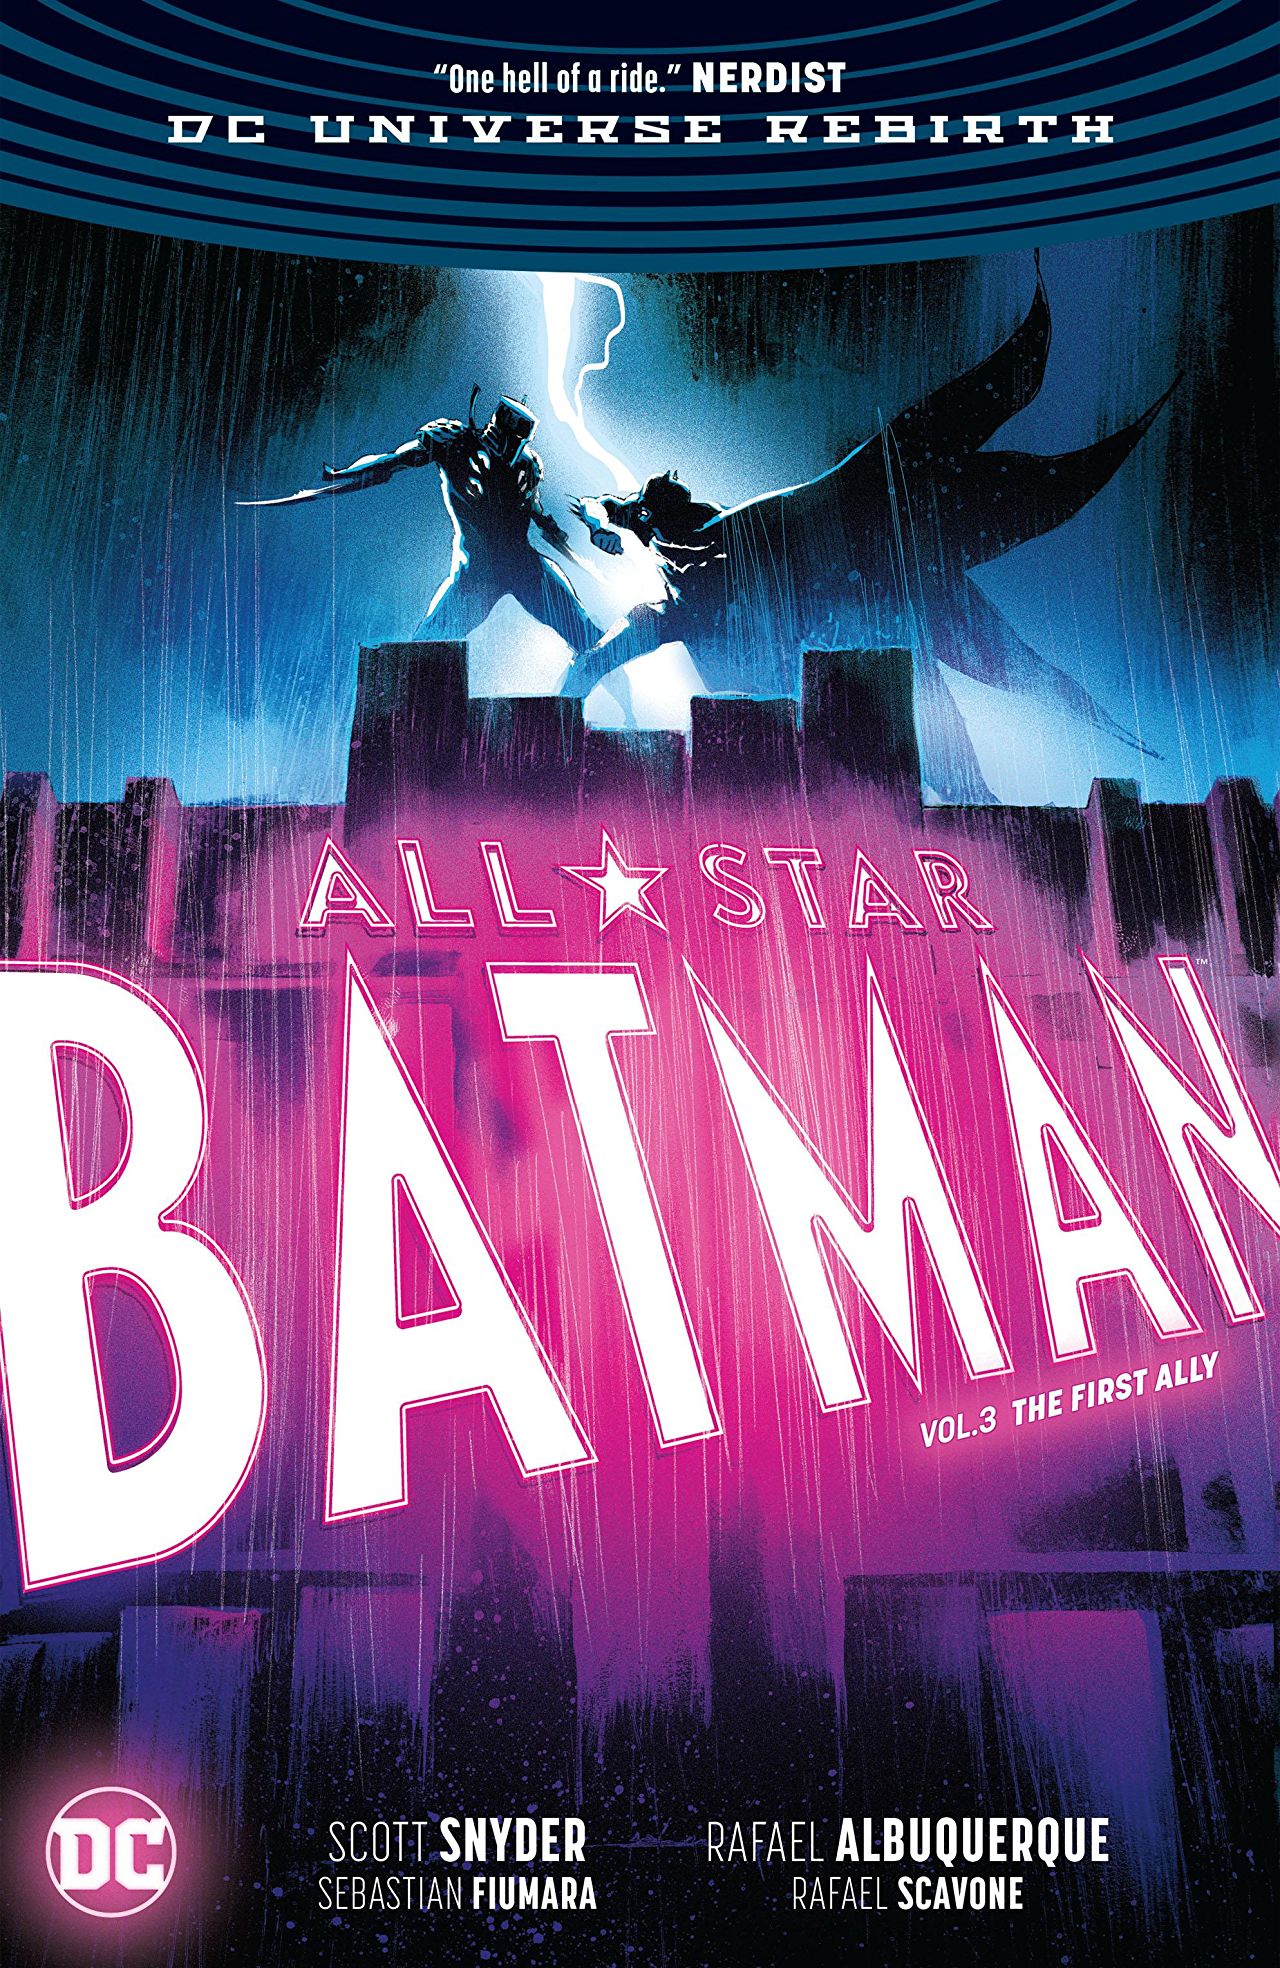 'All-Star Batman Vol. 3: The First Ally' offers a new look at one of Batman's most trusted colleagues